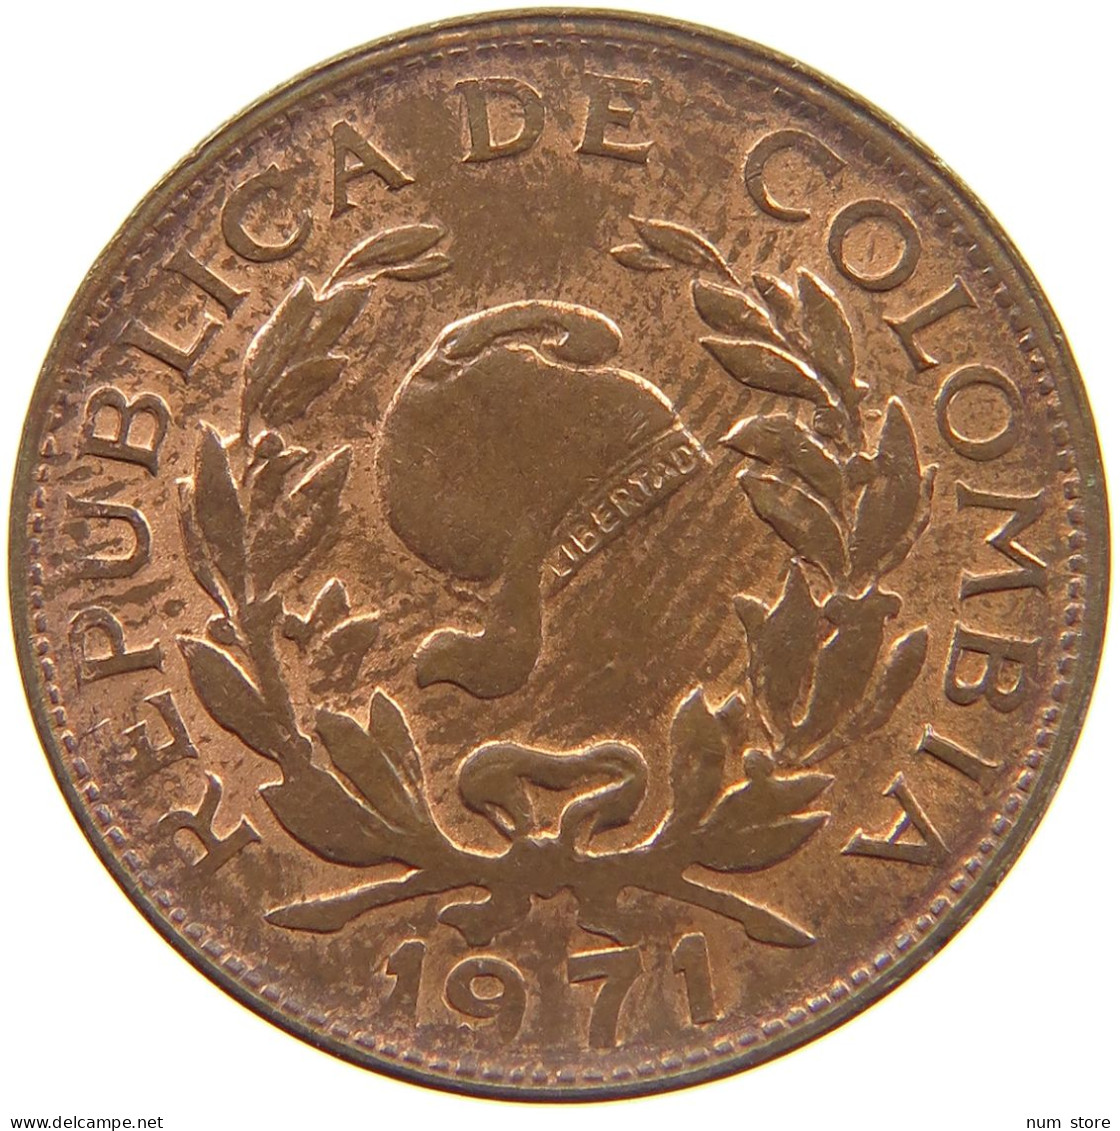 COLOMBIA 5 CENTAVOS 1971  #MA 025448 - Colombia